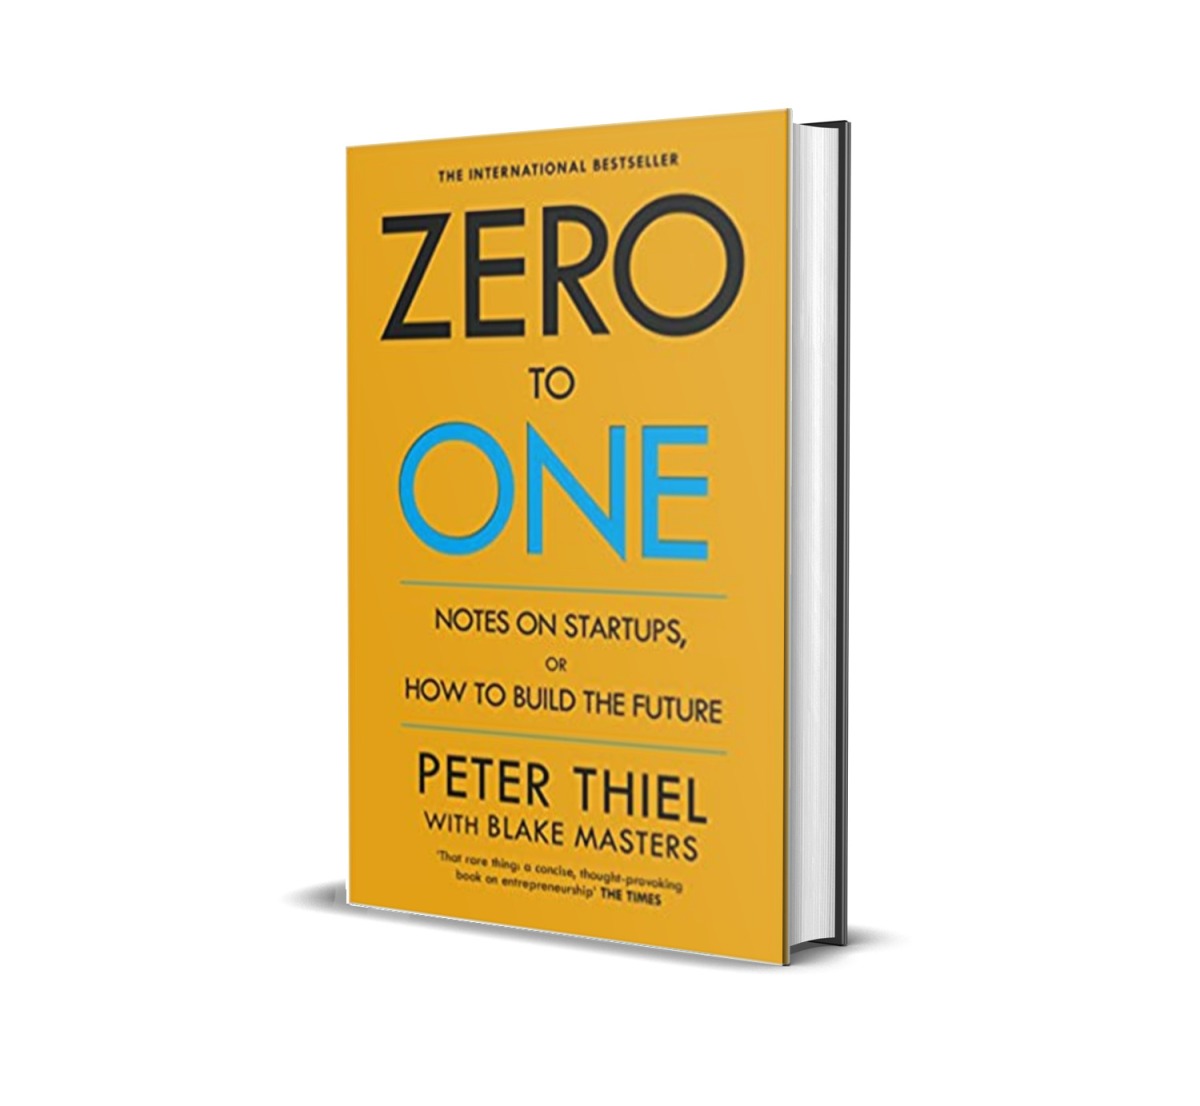 Zero to One” (Book Review) – As I learn …